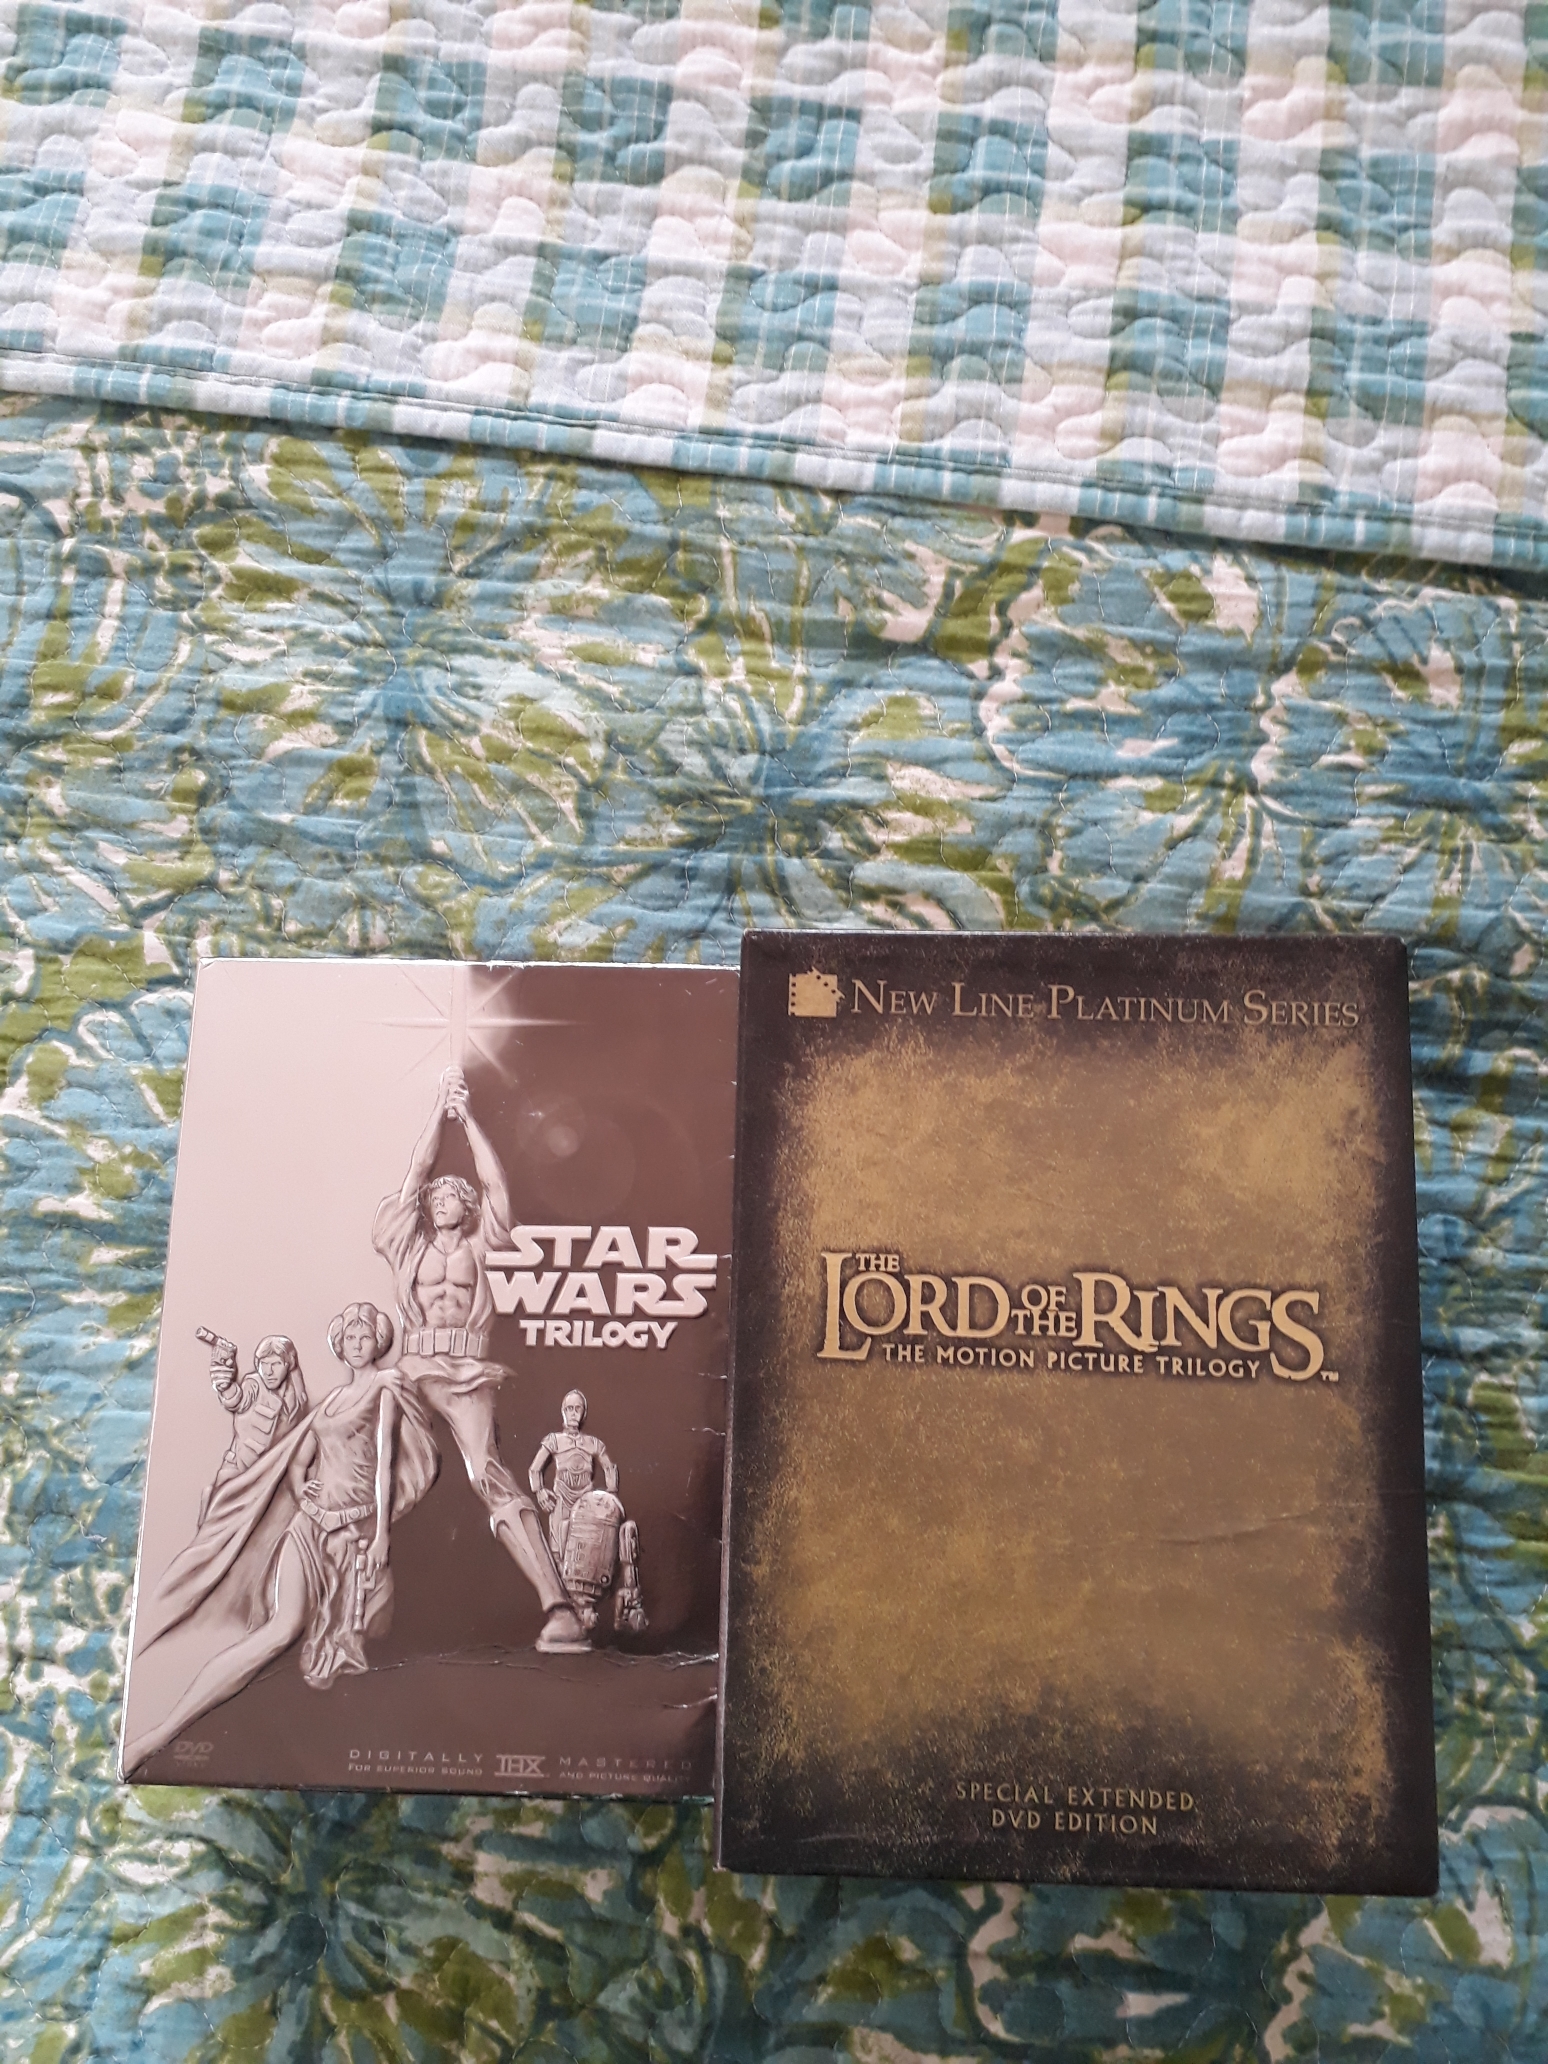 STAR WARS TRILOGY SET AND LORD OF THE RINGS TRILOGY SET (DVD)